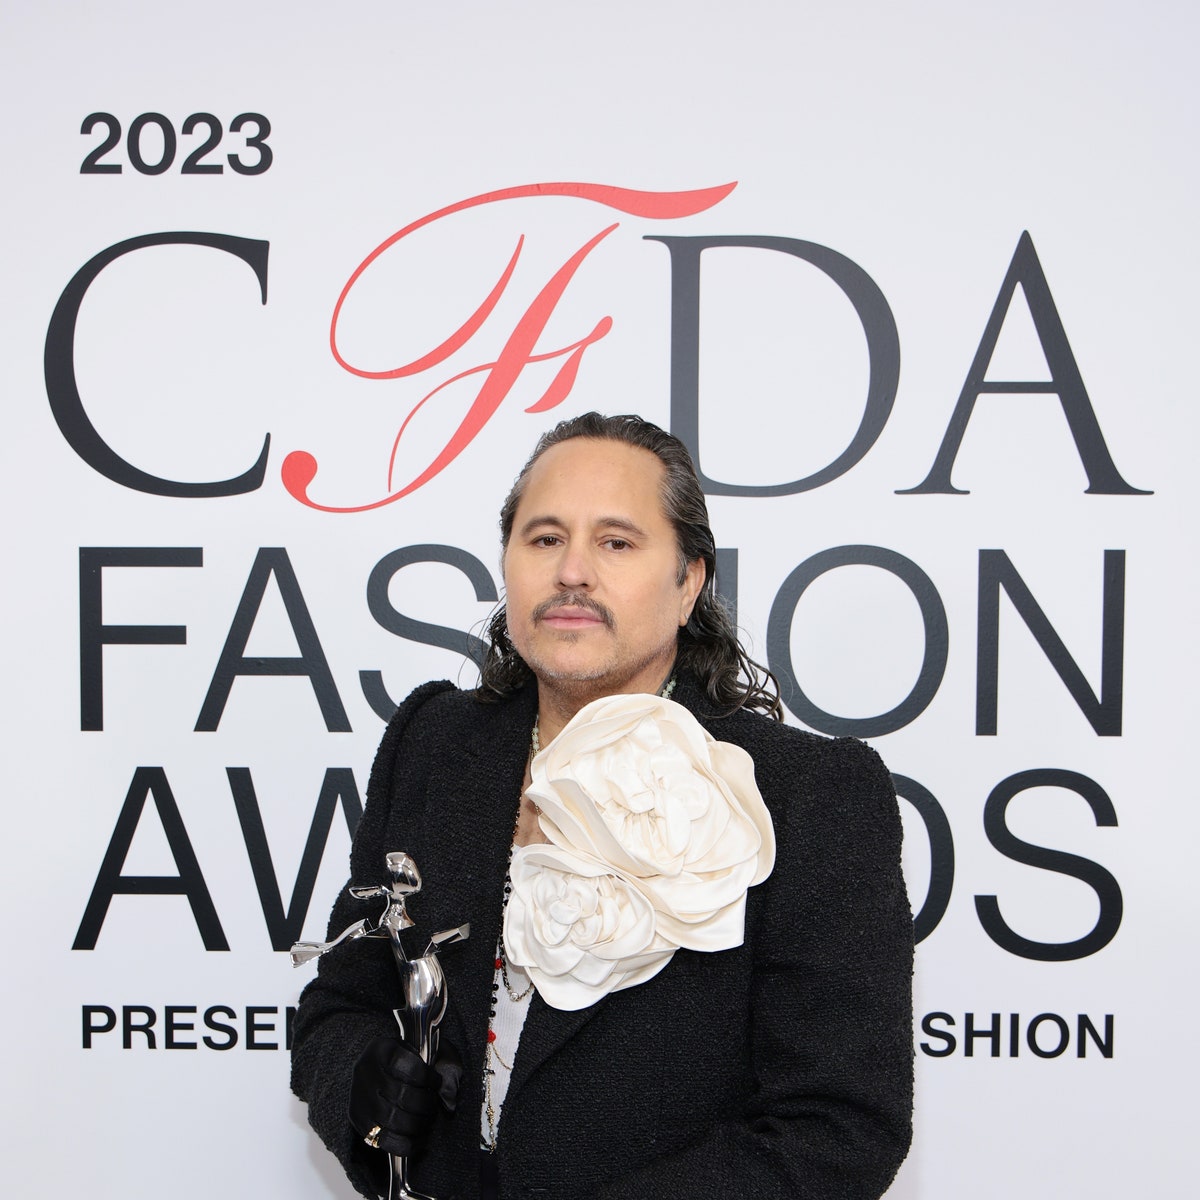 Night at the museum: Catherine Holstein, Willy Chavarria and Rachel Scott win at the 2023 CFDA Awards